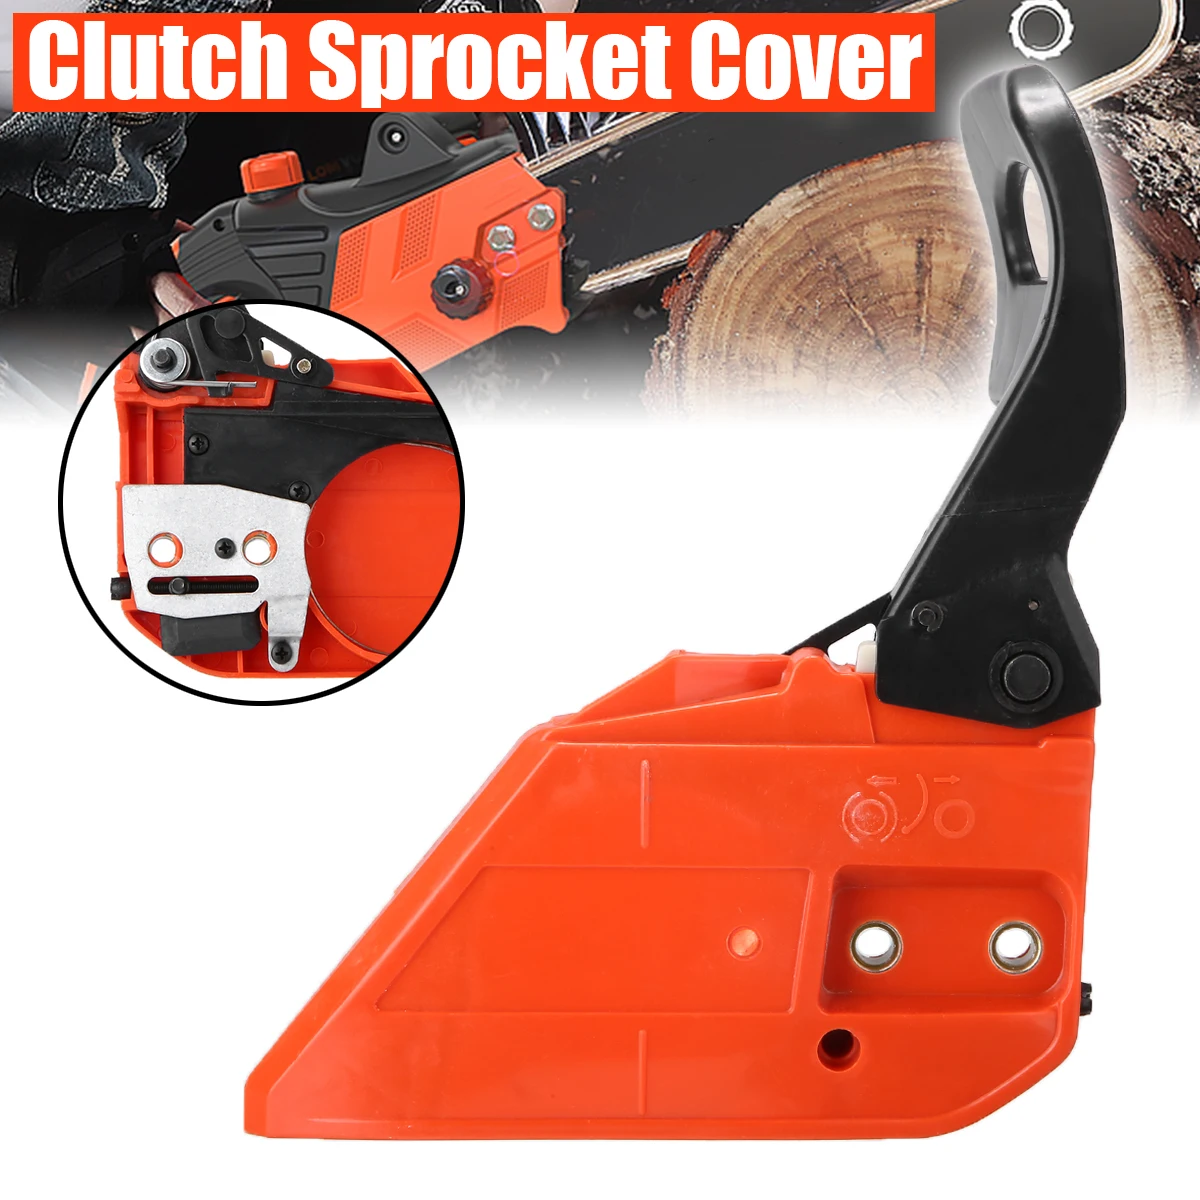 Brake Handle Side Clutch Cover For CHINESE CHAINSAW 2500 25CC Chainsaw 